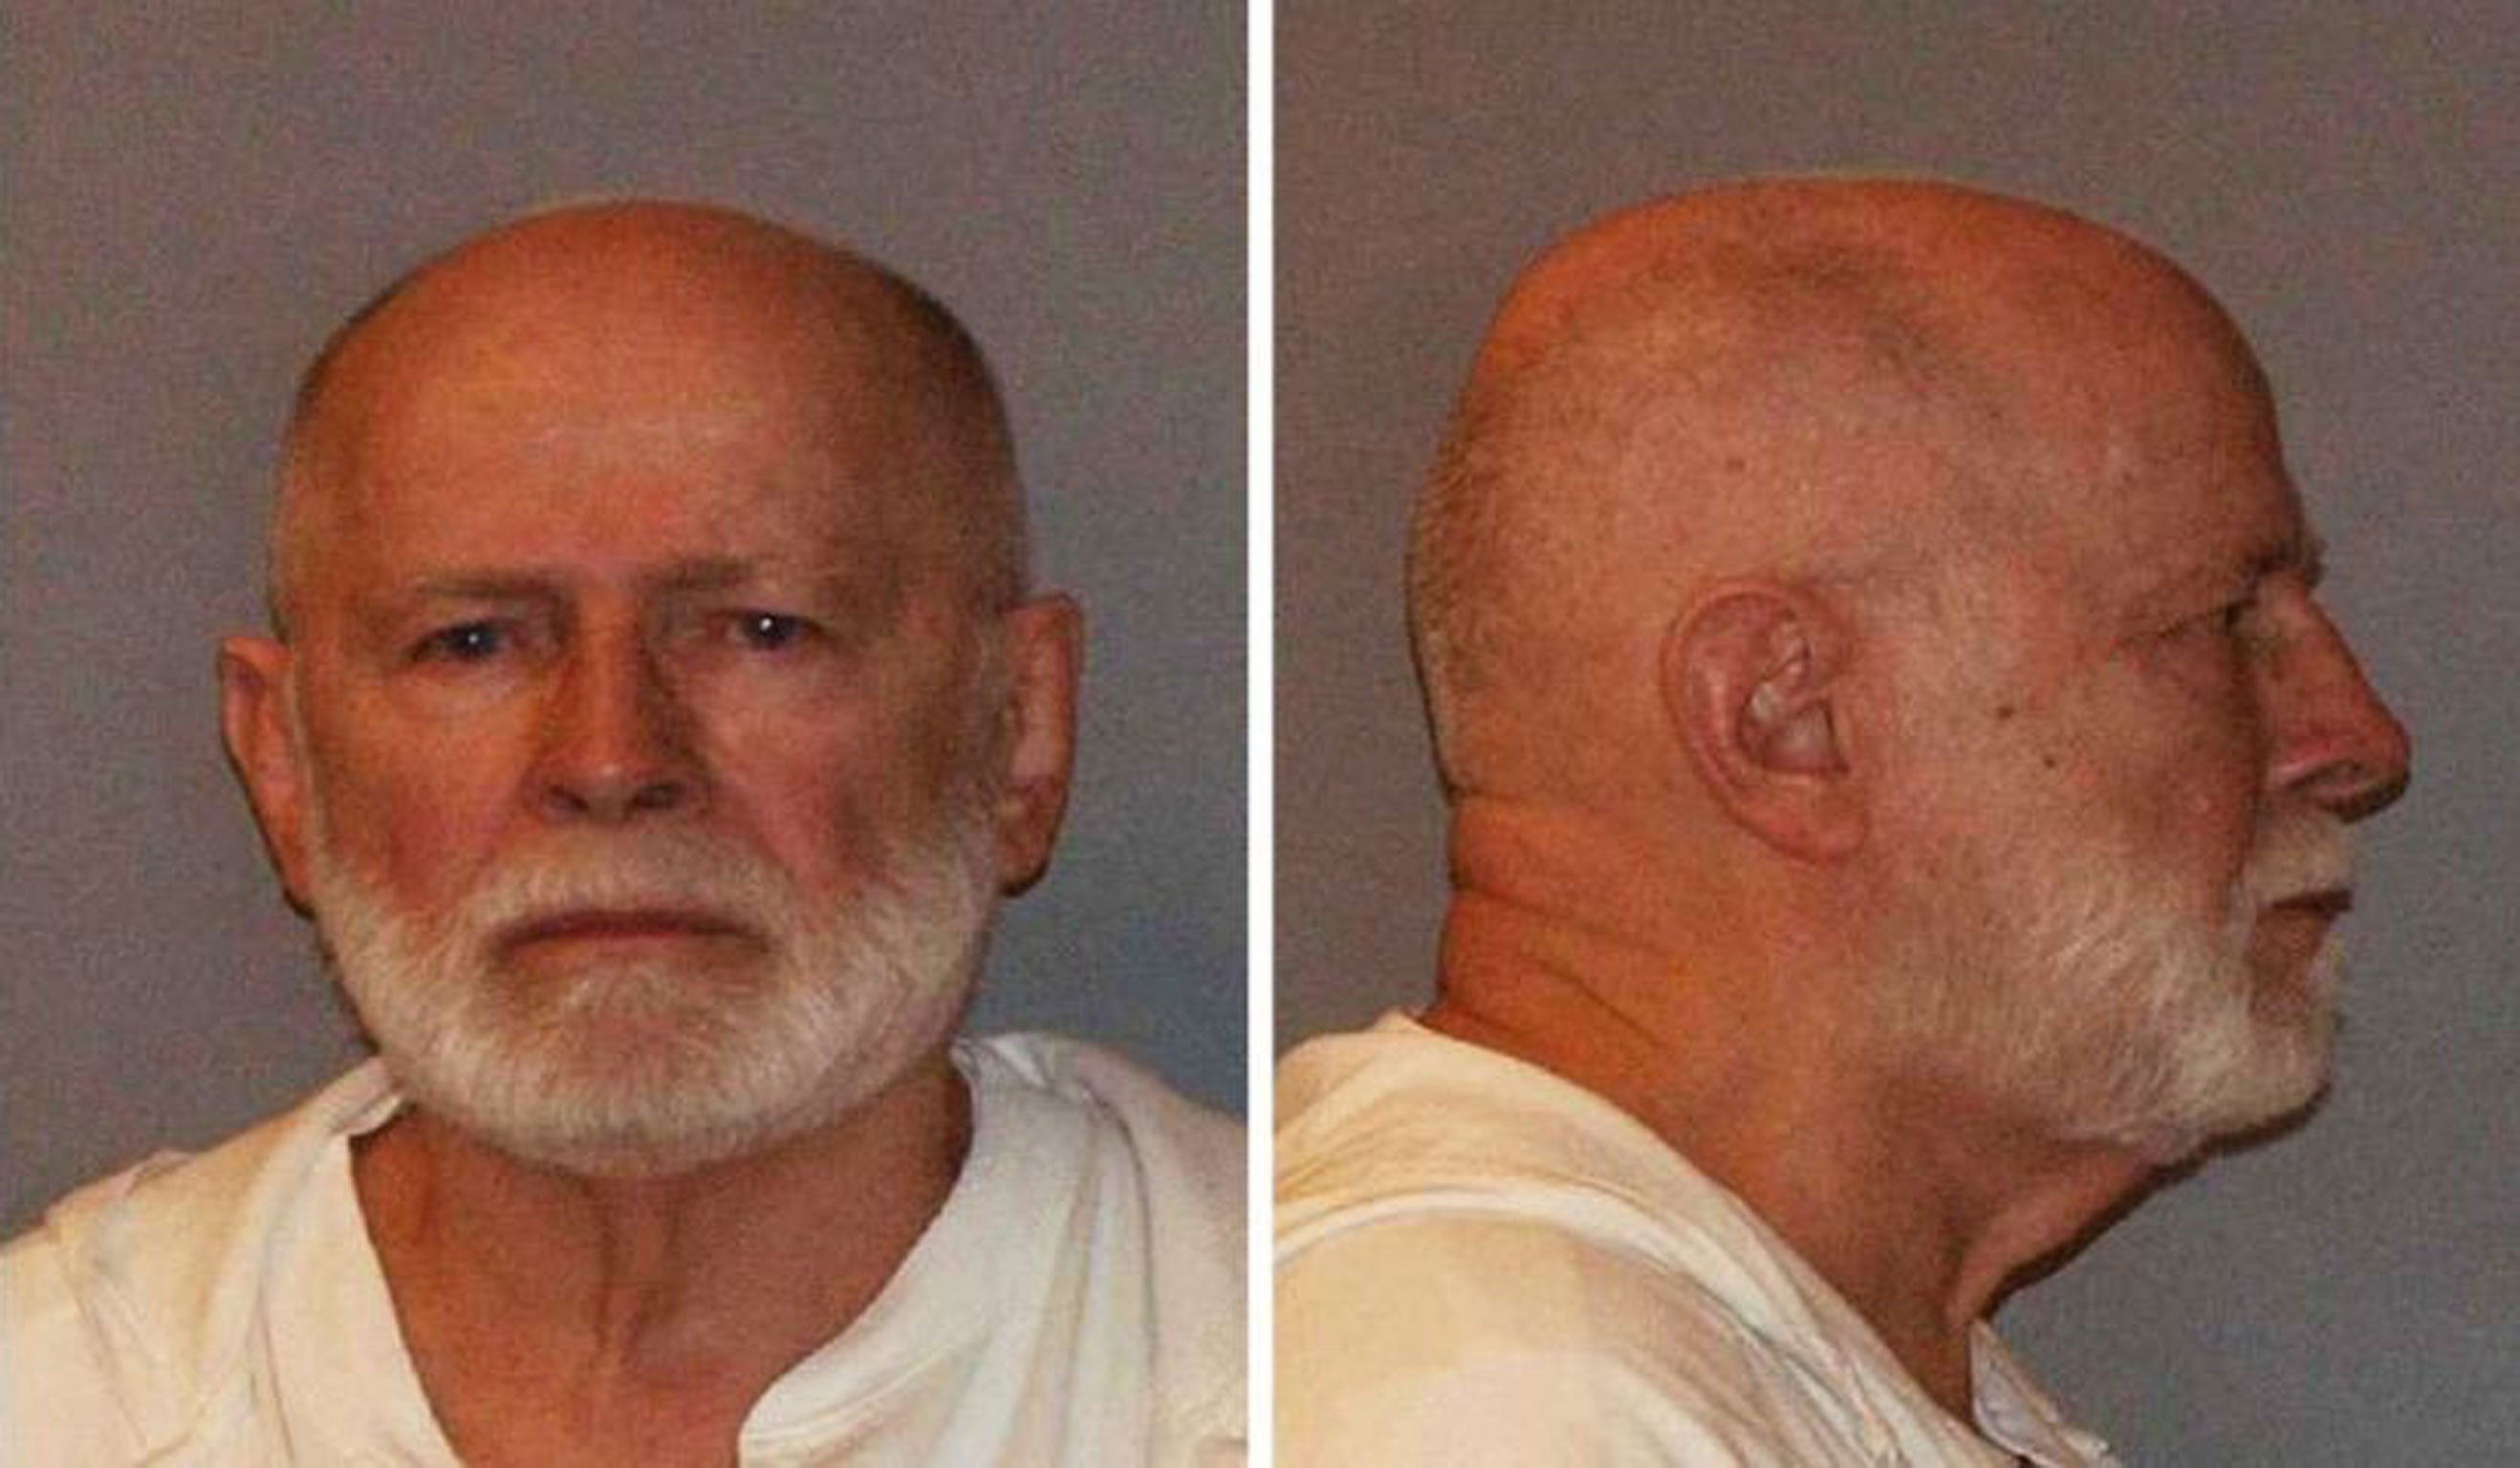 Infamous Boston gangster James 'Whitey' Bulger, pictured here shortly after his arrest in June 2011, has been sentenced to two life terms plus five years in jail